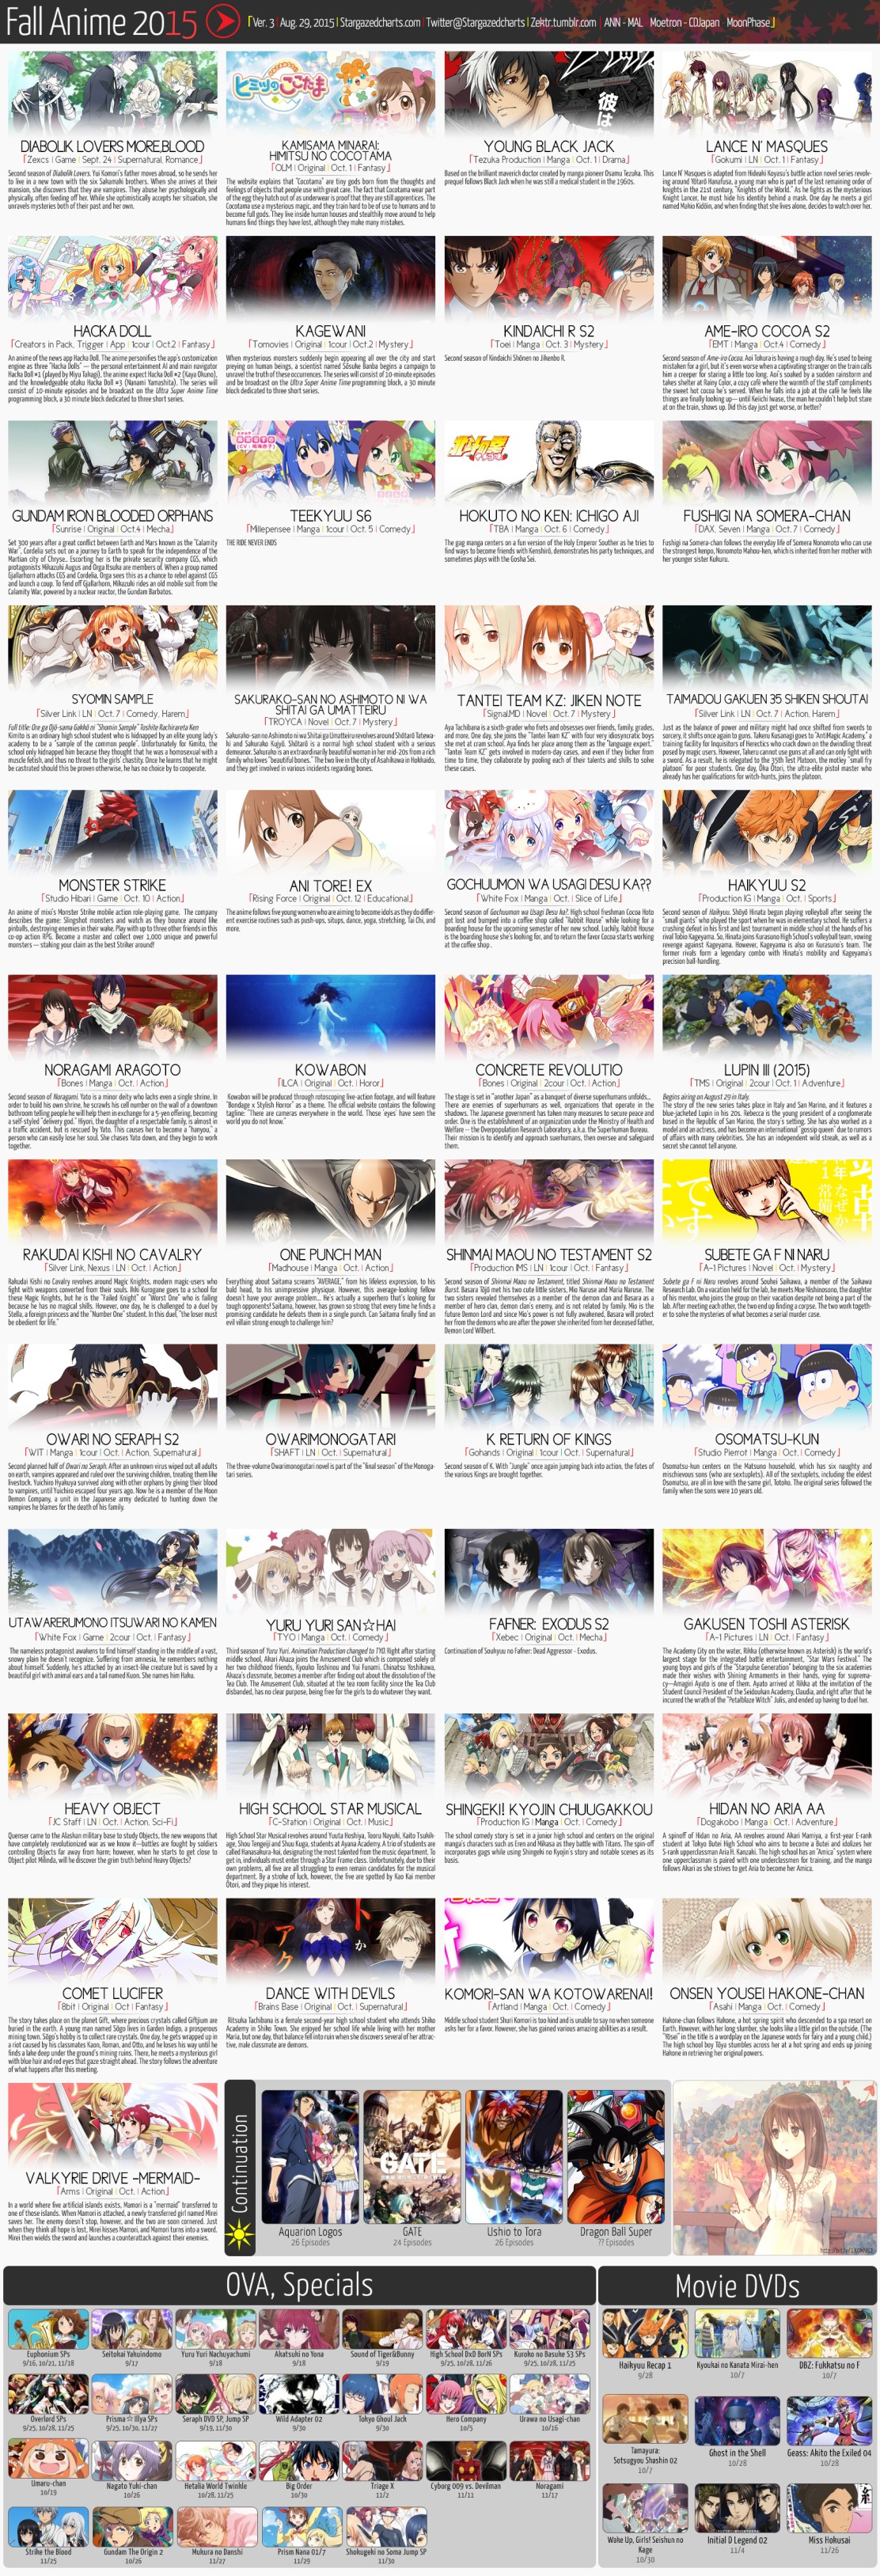 New Anime's This Fall 2015